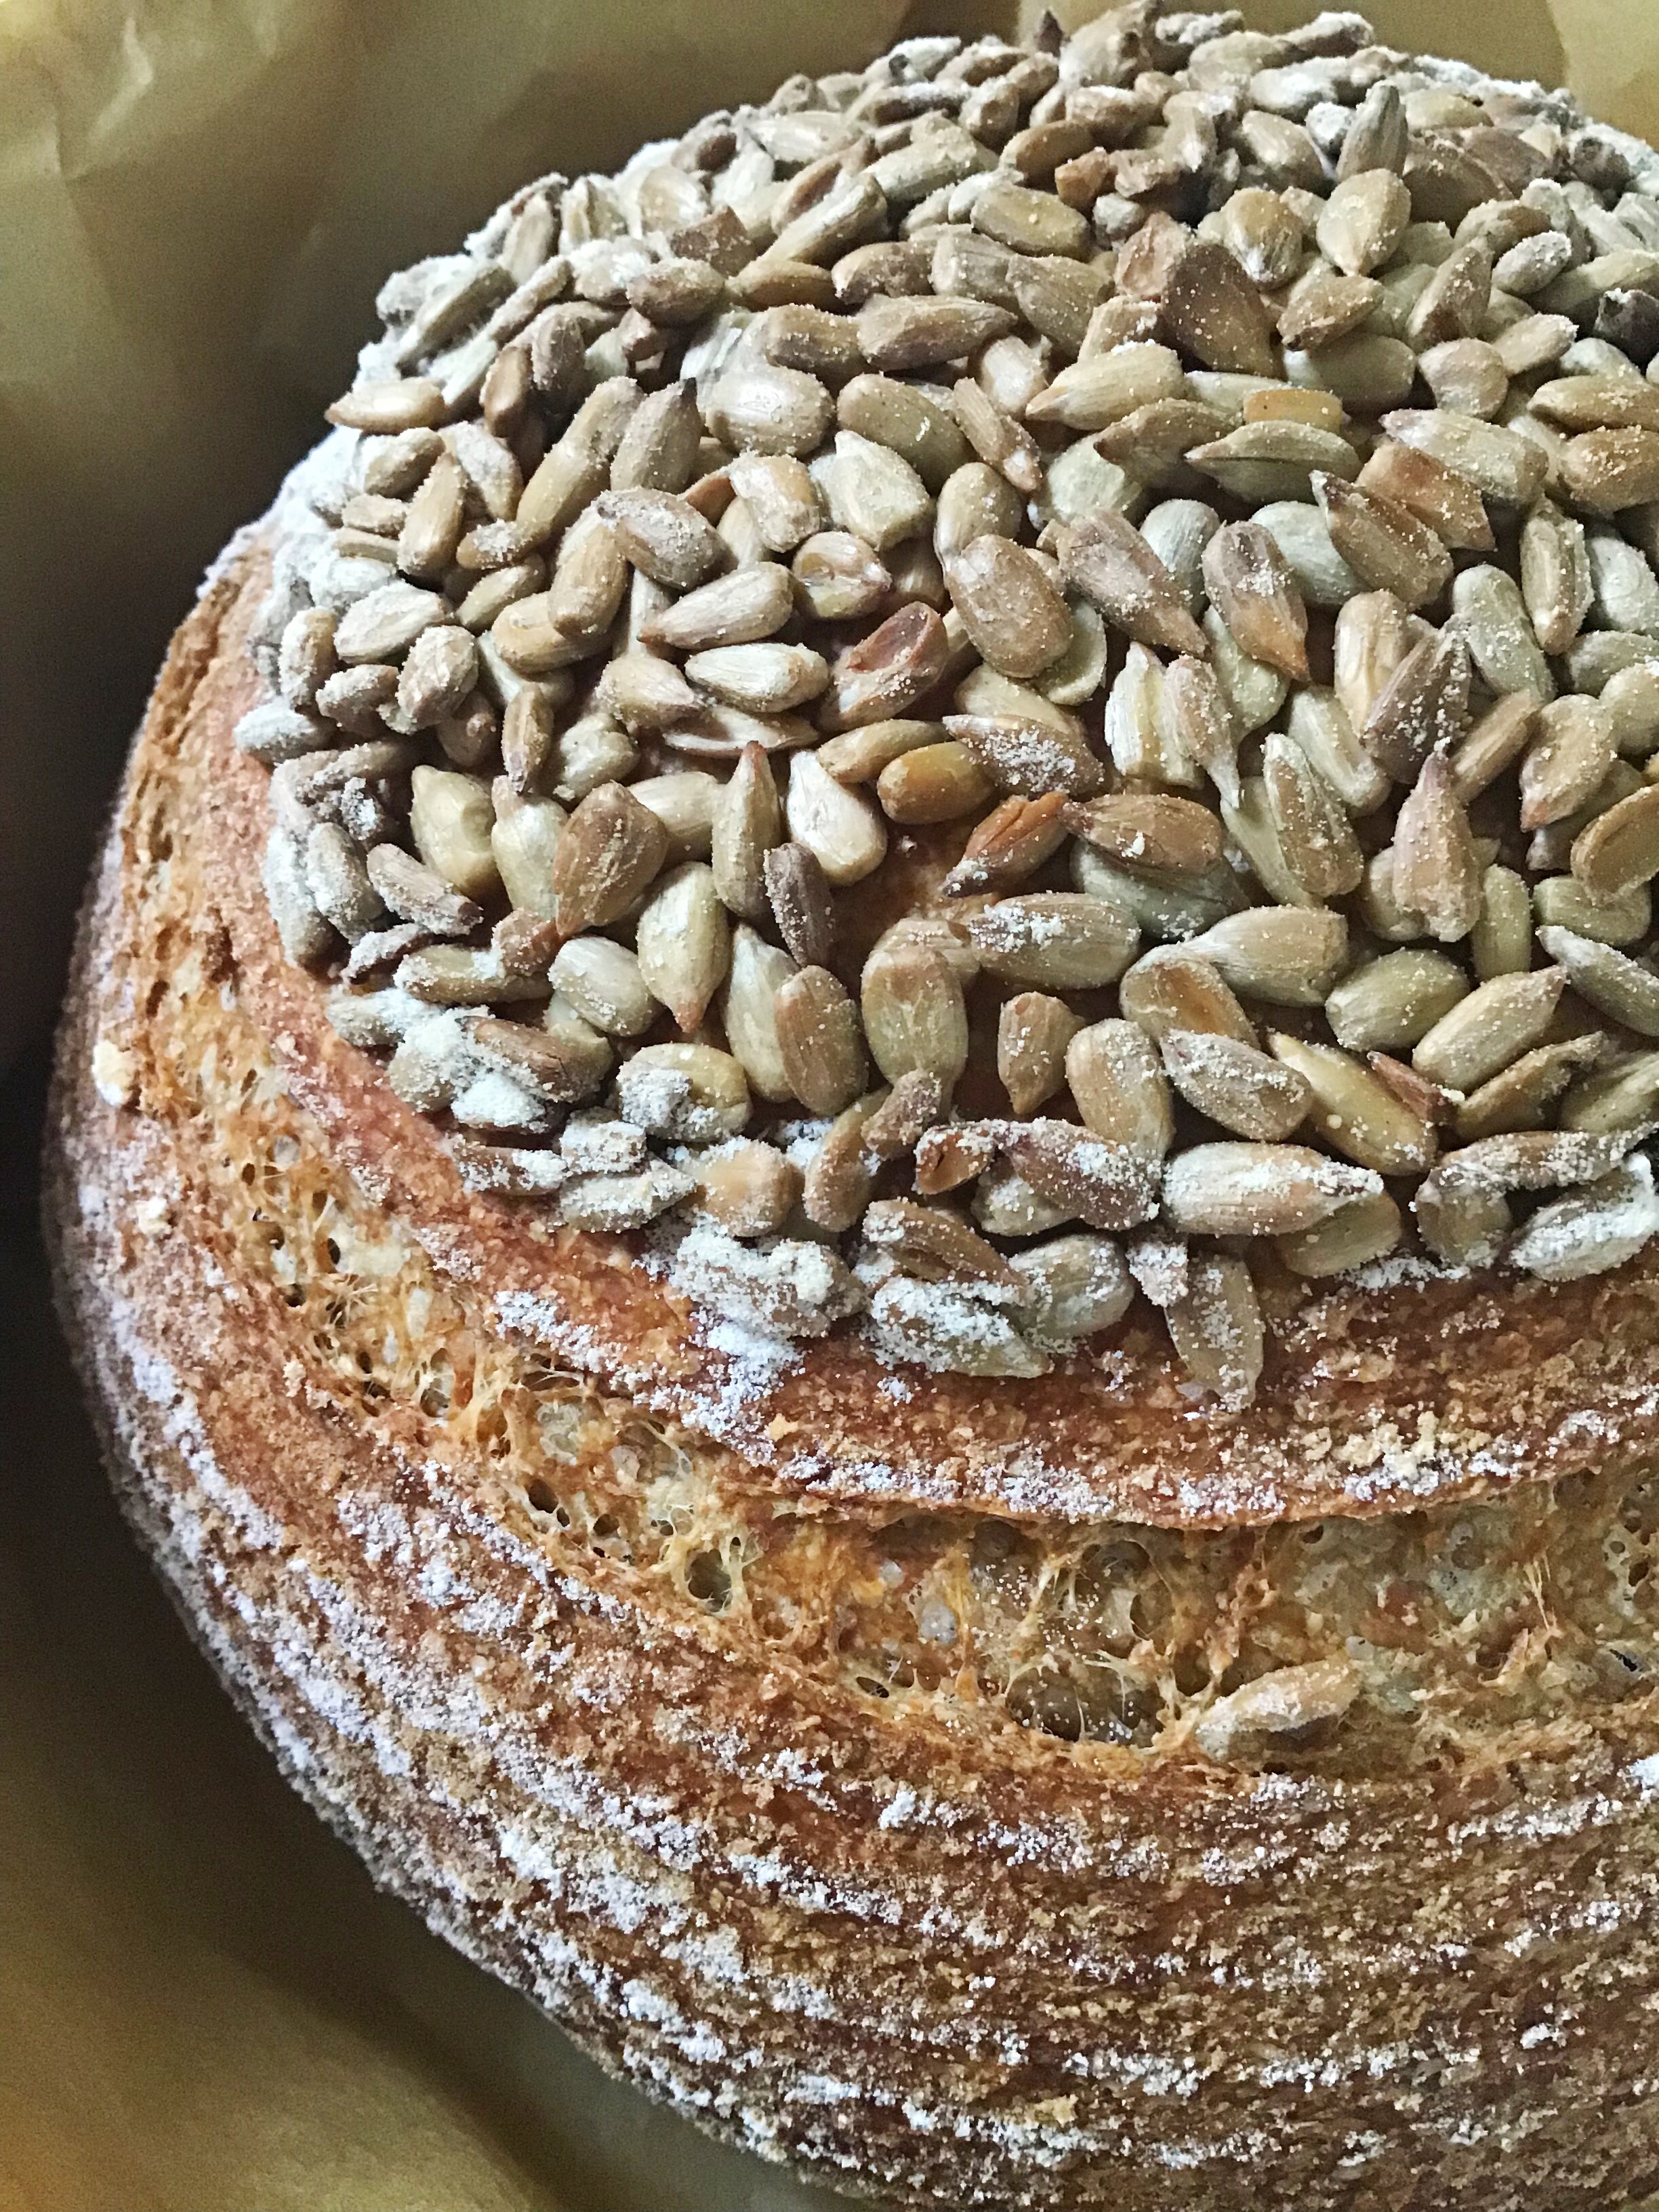 A close up of some bread with nuts on top